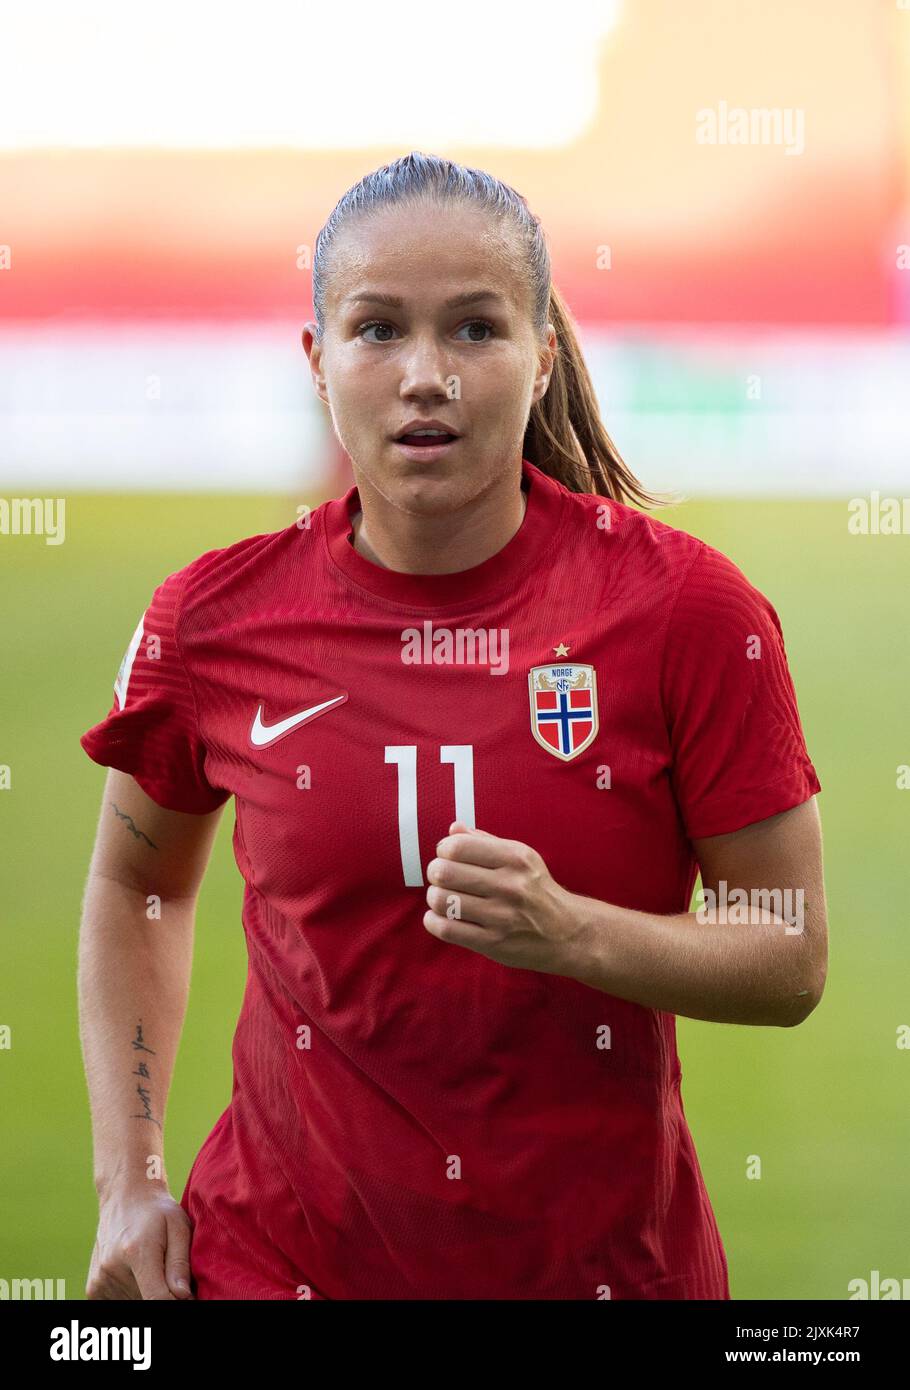 Oslo, Norway. 06th Sep, 2022. Oslo, Norway, September 6th 2022: Guro Reiten (11 Norway) at the World Cup Qualification game between Norway and Albania at Ullevaal Stadium in Oslo, Norway (Ane Frosaker/SPP) Credit: SPP Sport Press Photo. /Alamy Live News Stock Photo